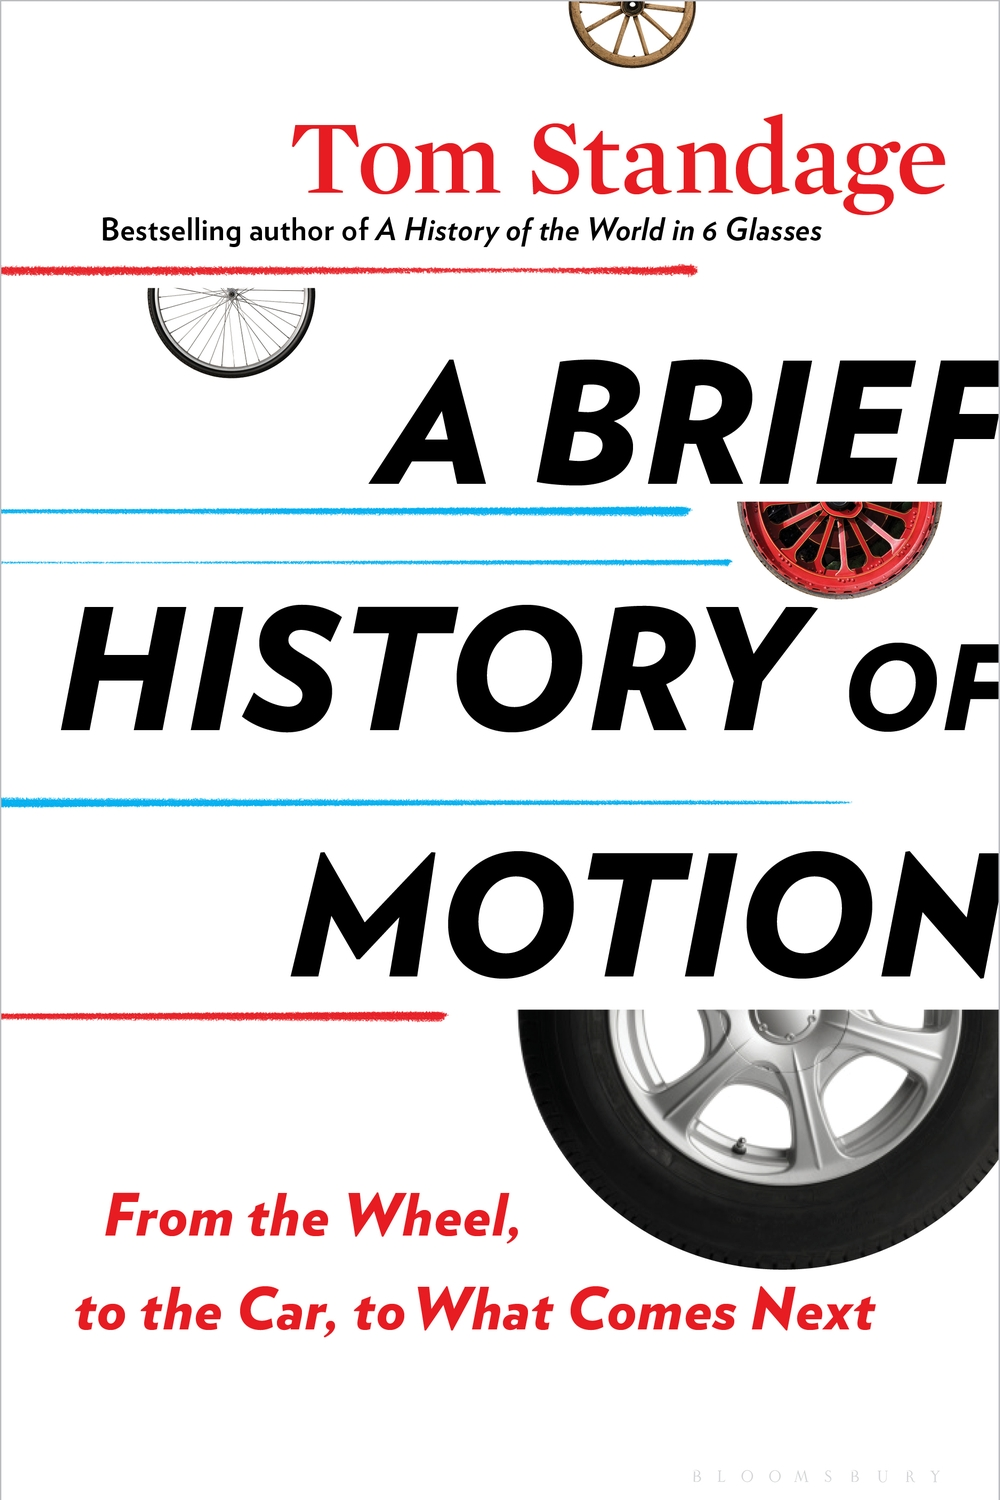 The cover of the book A Brief History of Motion, with the title in block letters over images of a few different kinds of wheels